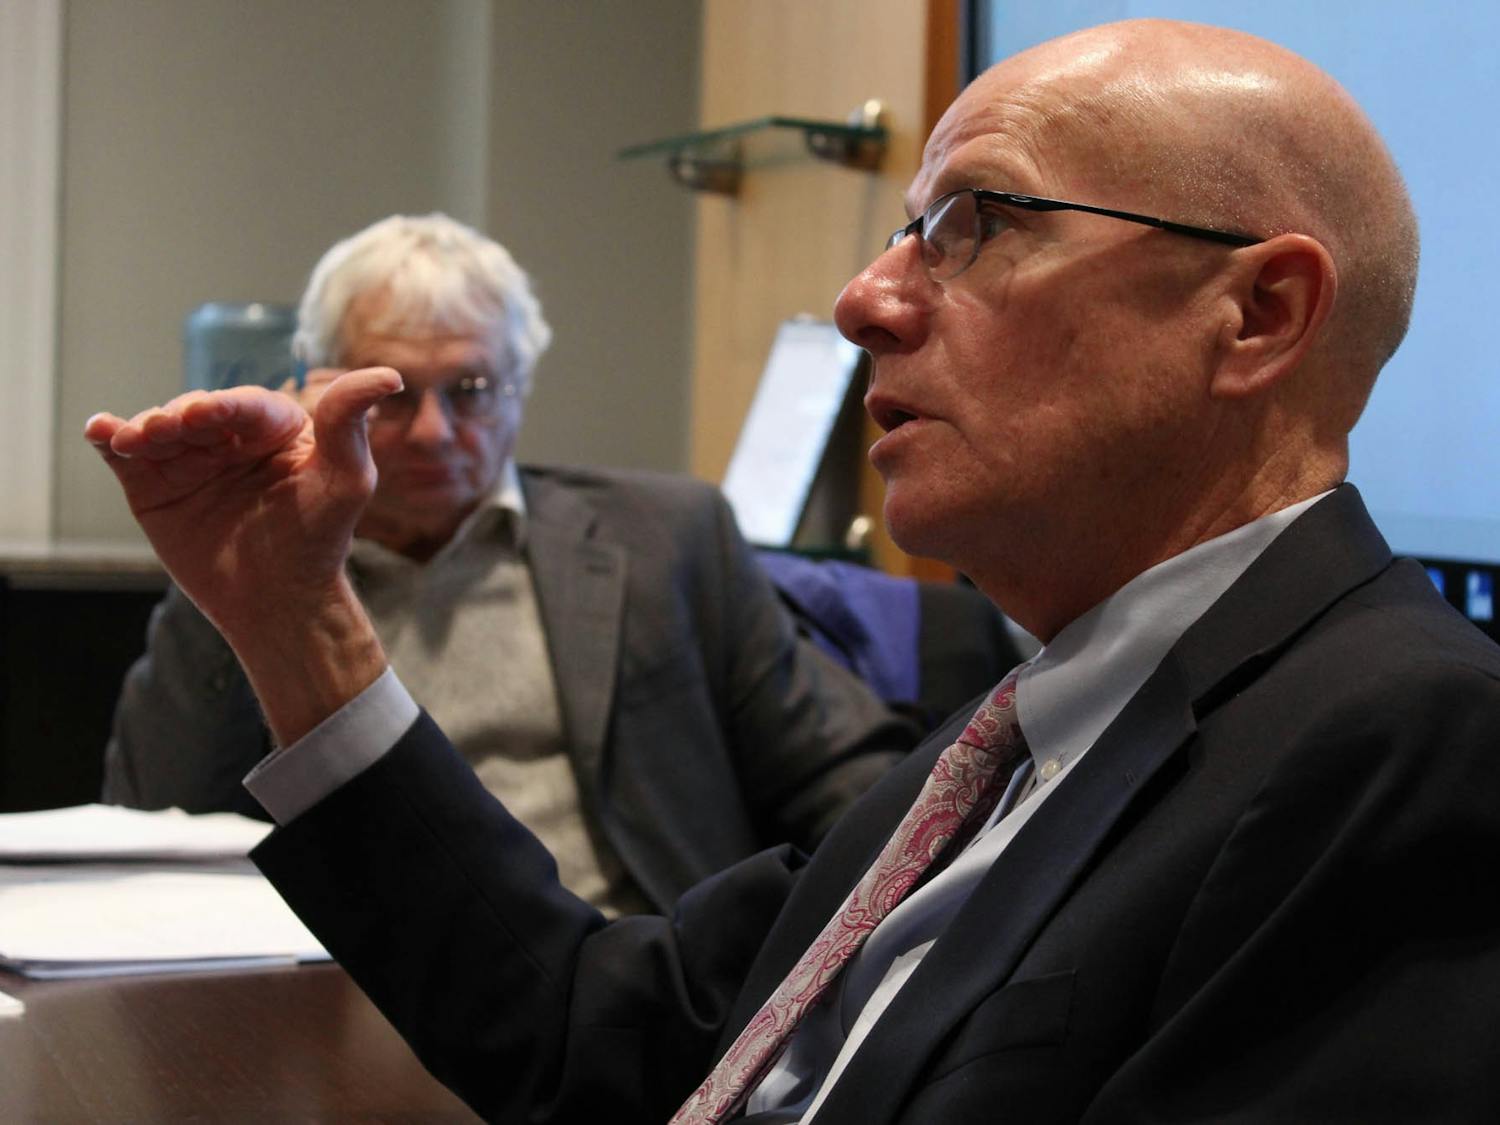 Executive Vice Chancellor and Provost Robert A. Blouin (front) and Chairperson of the Faculty Lloyd Kramer discuss lagging faculty salaries during the Faculty Executive Committee's meeting on Monday Jan. 27, 2020.